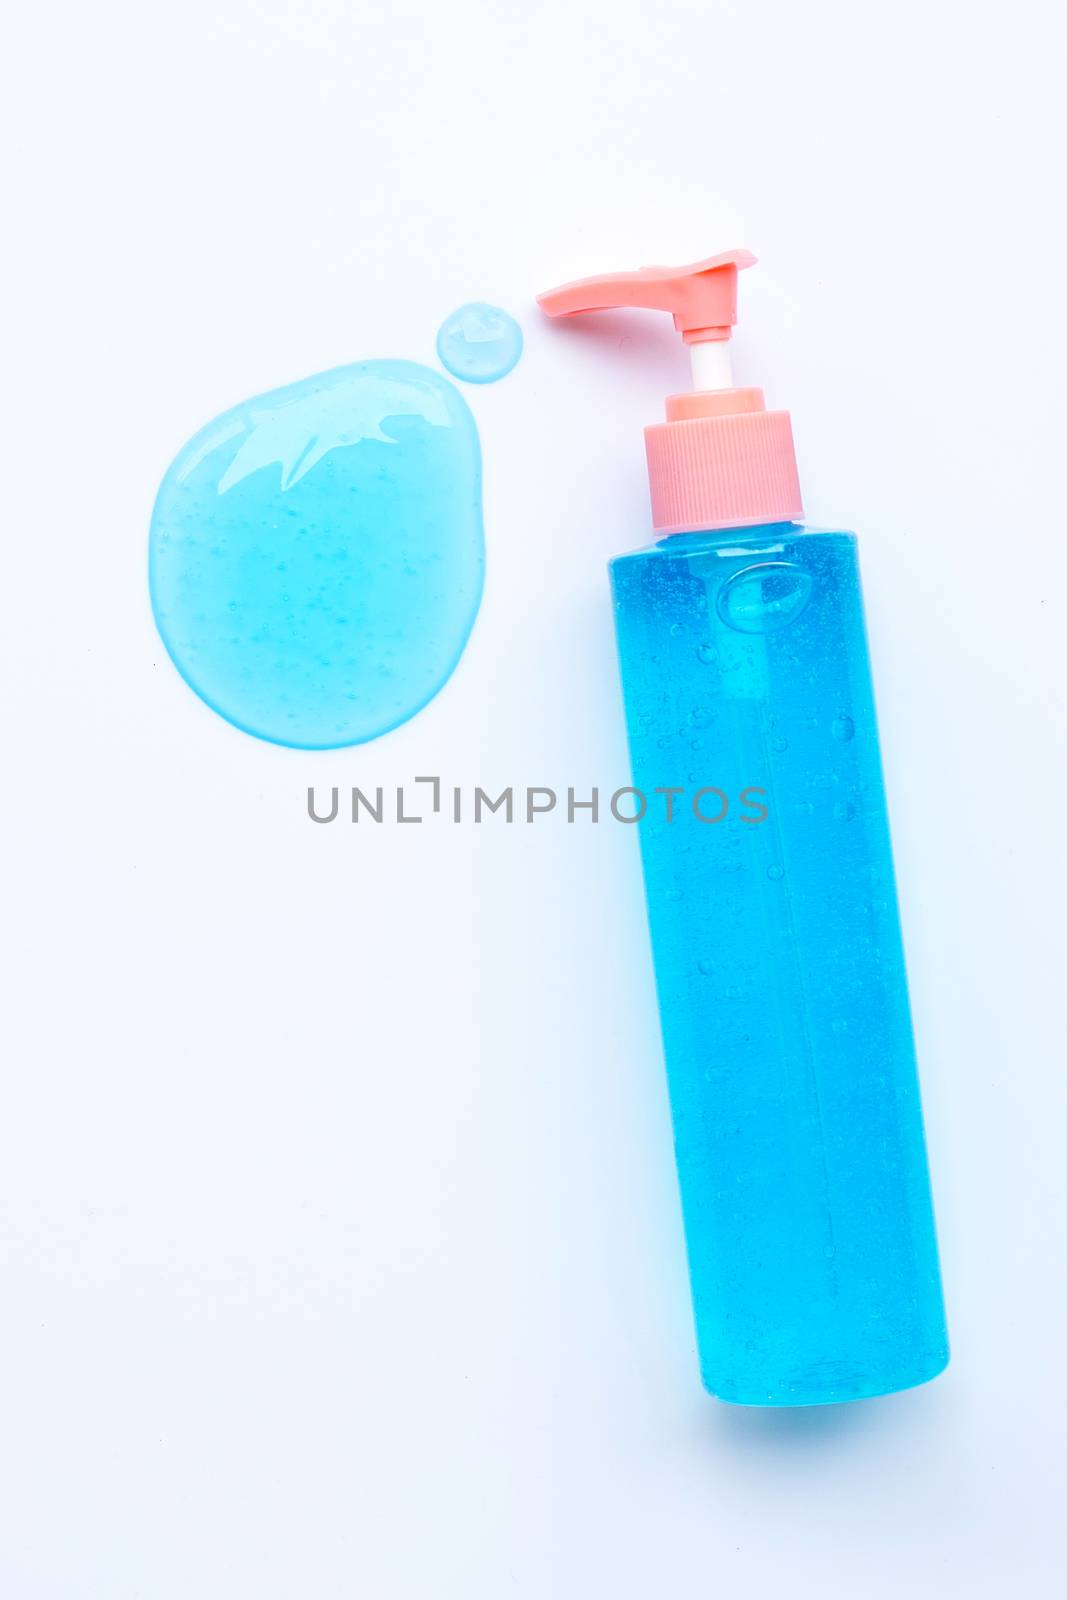 Alcohol hand sanitizer gel in pump bottle on white background. Copy space